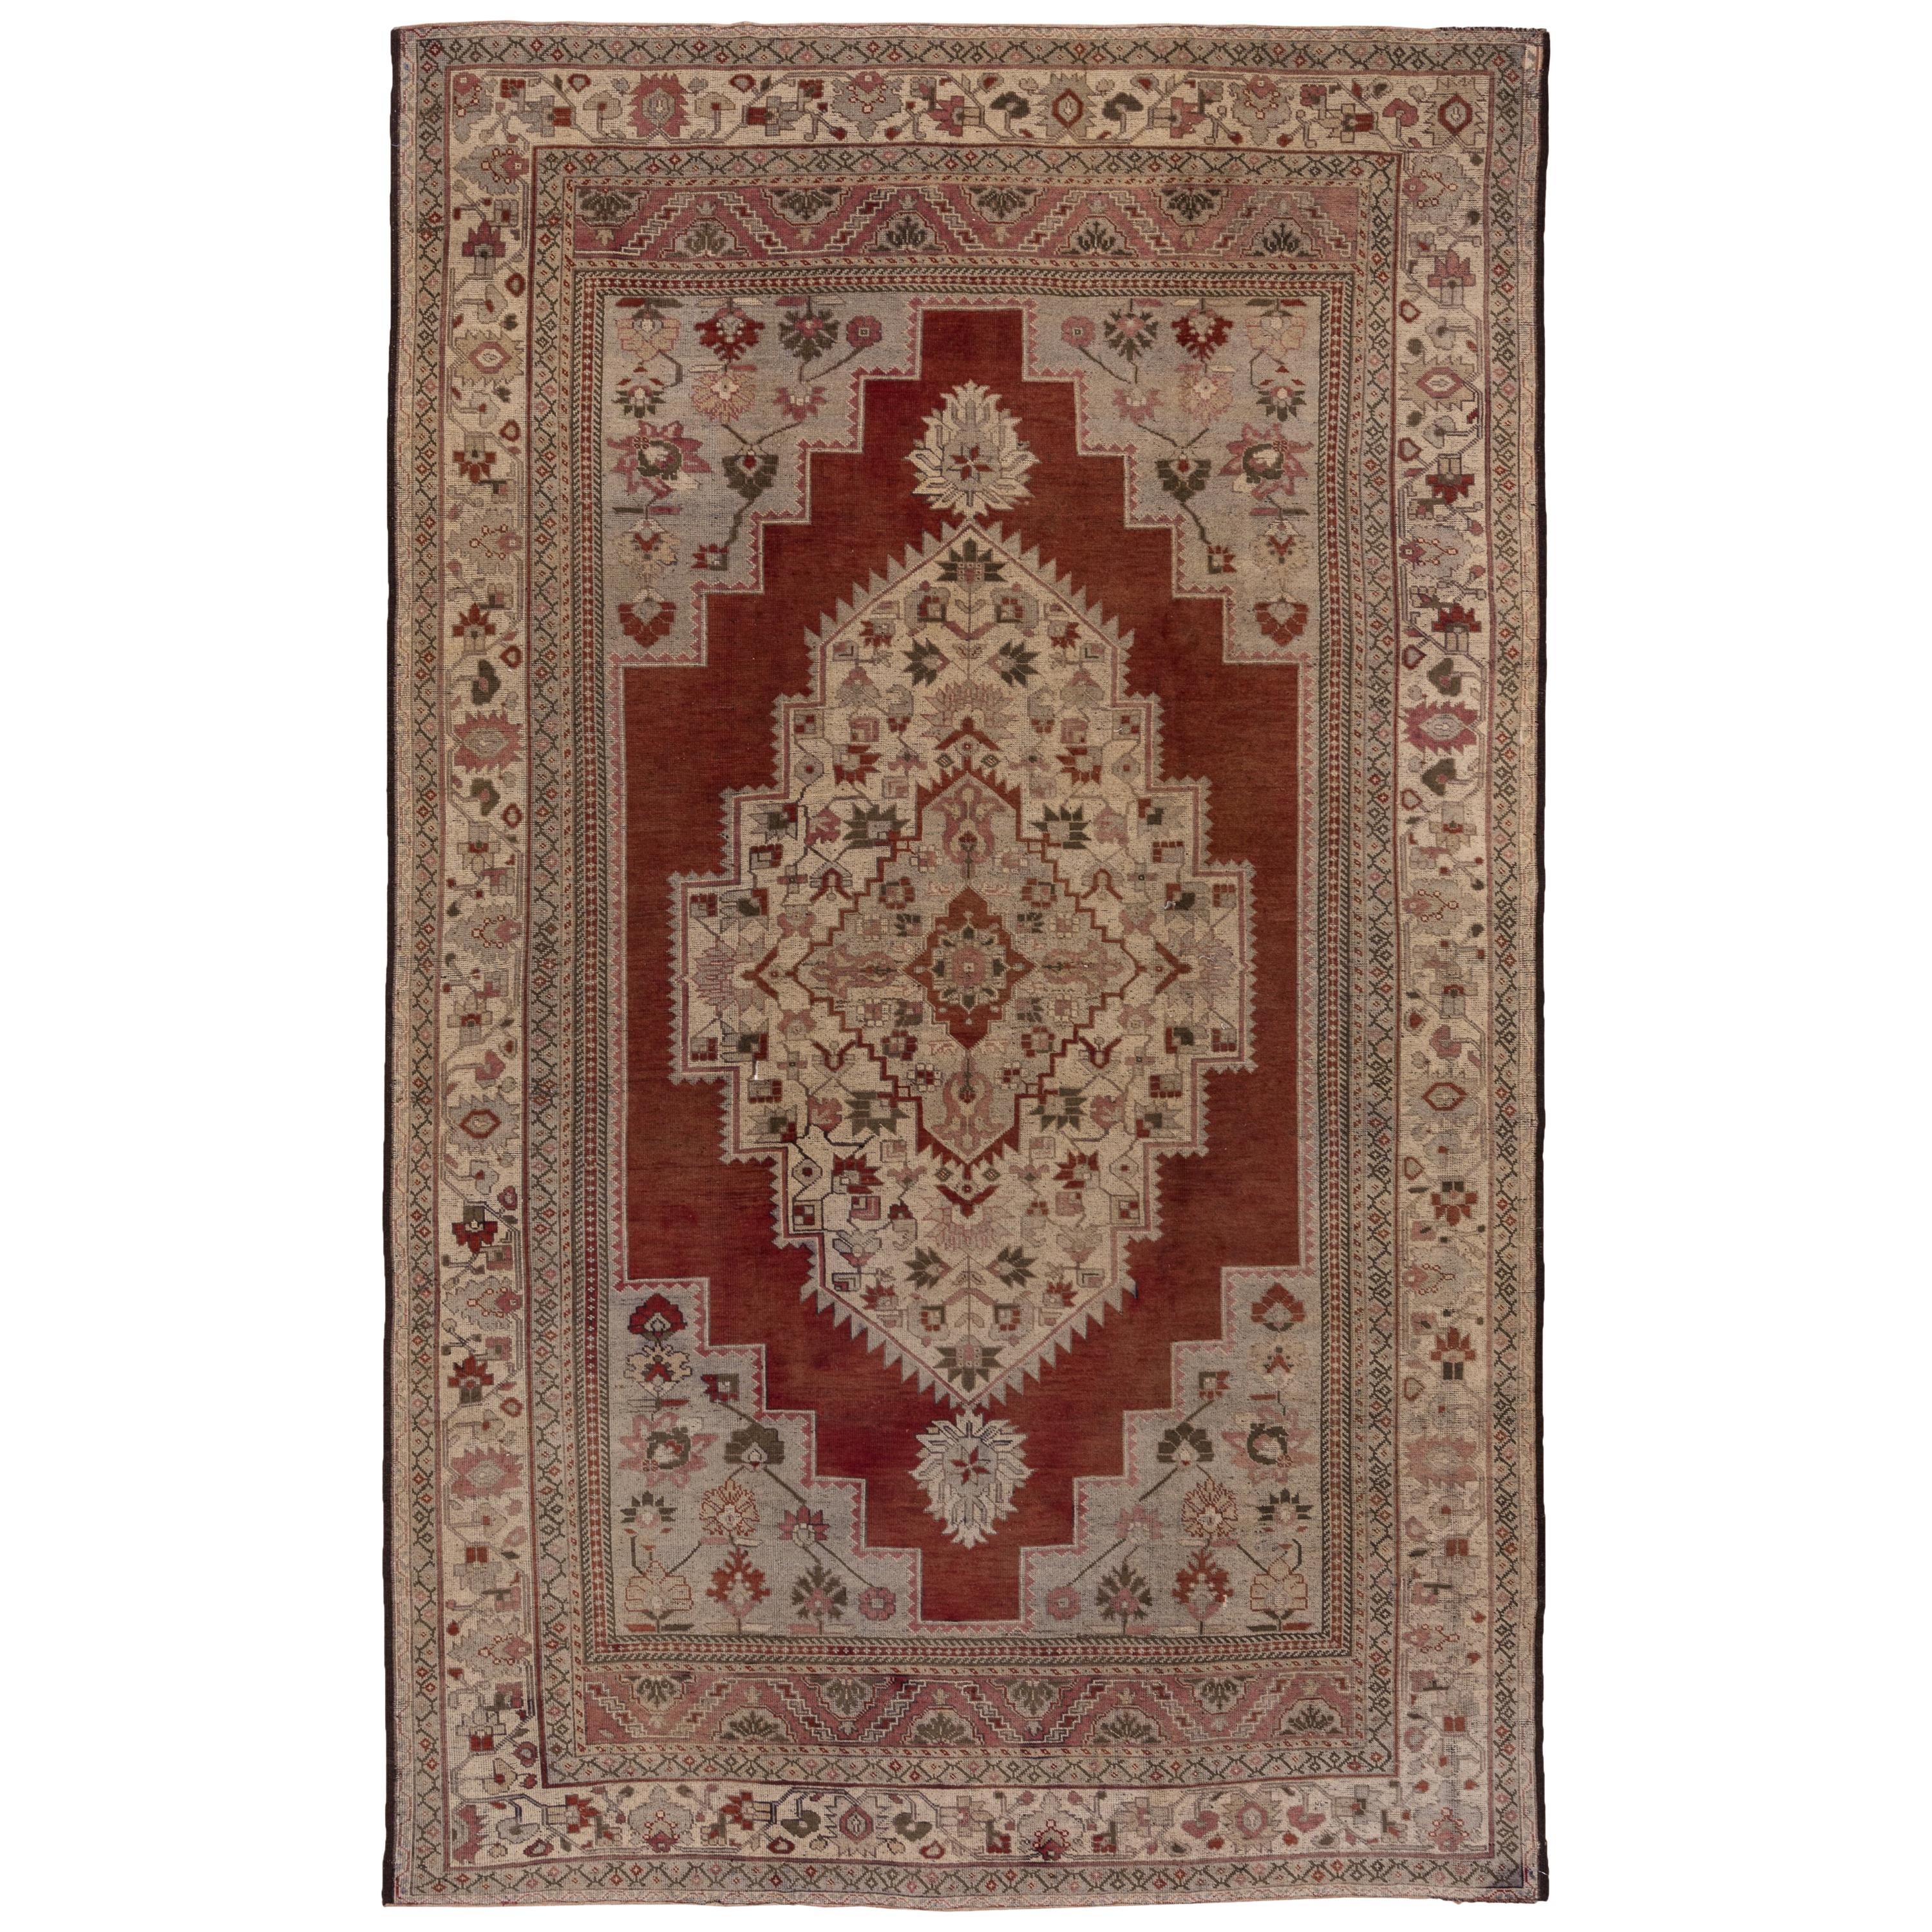 Antique Turkish Oushak Rug, Red Outer Field, Ecru Borders and Ecru Medallion